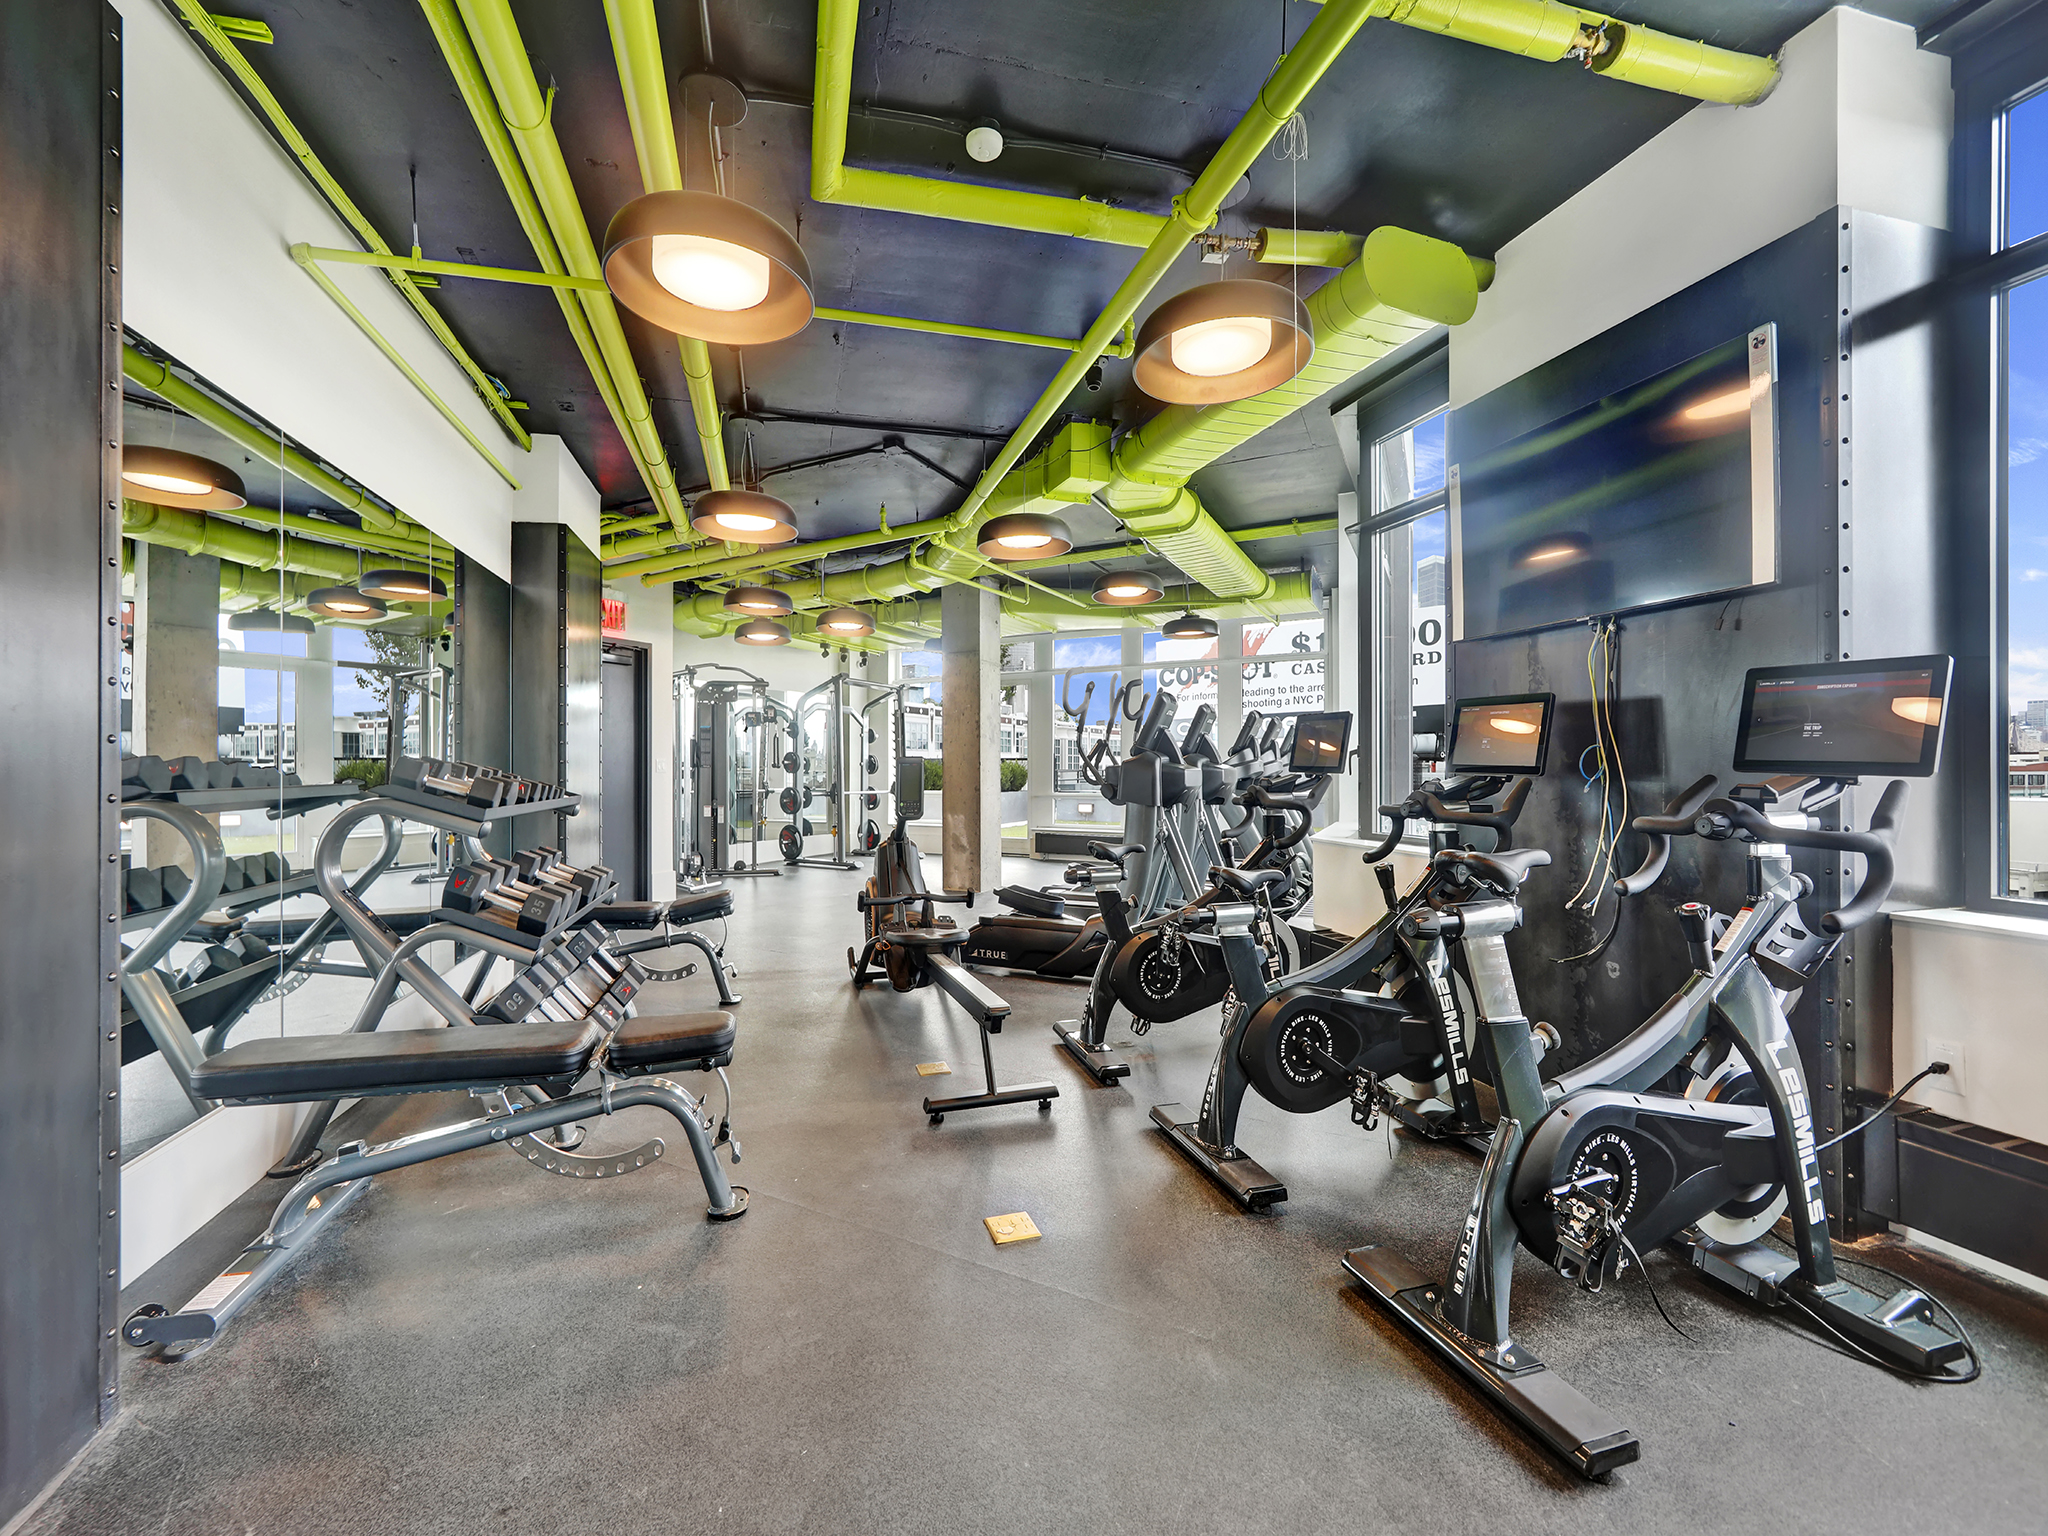 Bright fitness center with large windows, weights, ellipticals, bikes